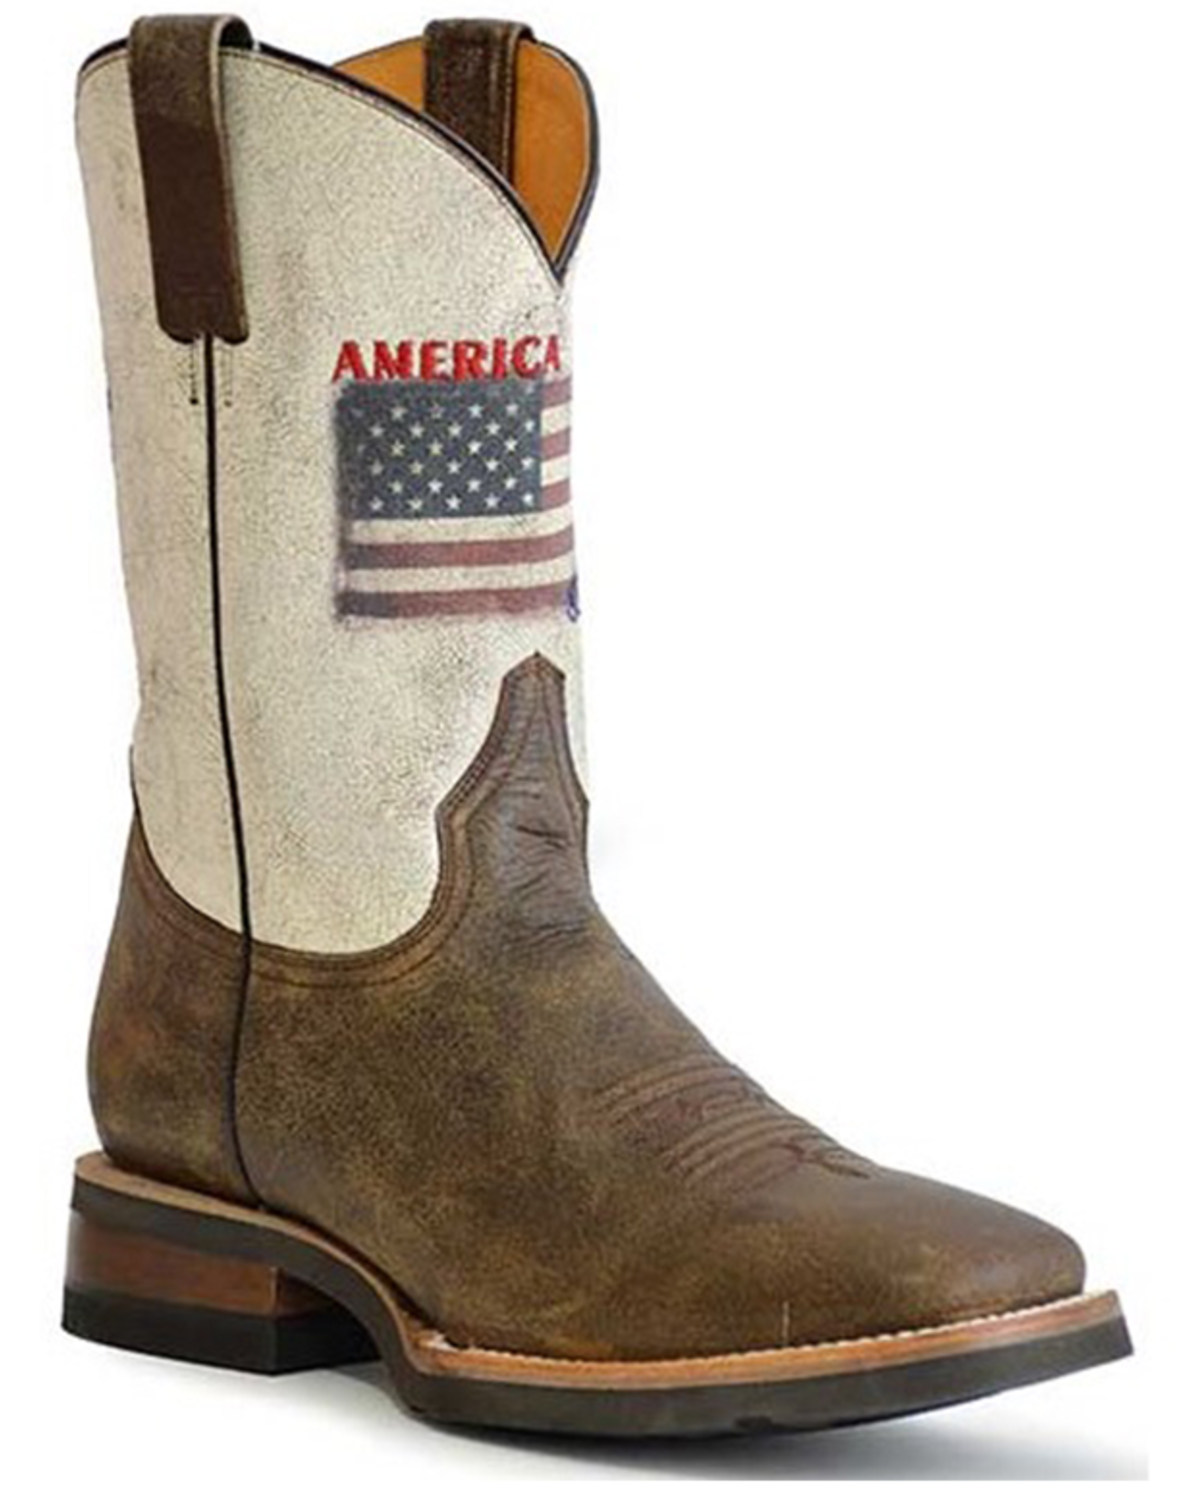 Roper Men's America Strong Performance Western Boots - Square Toe